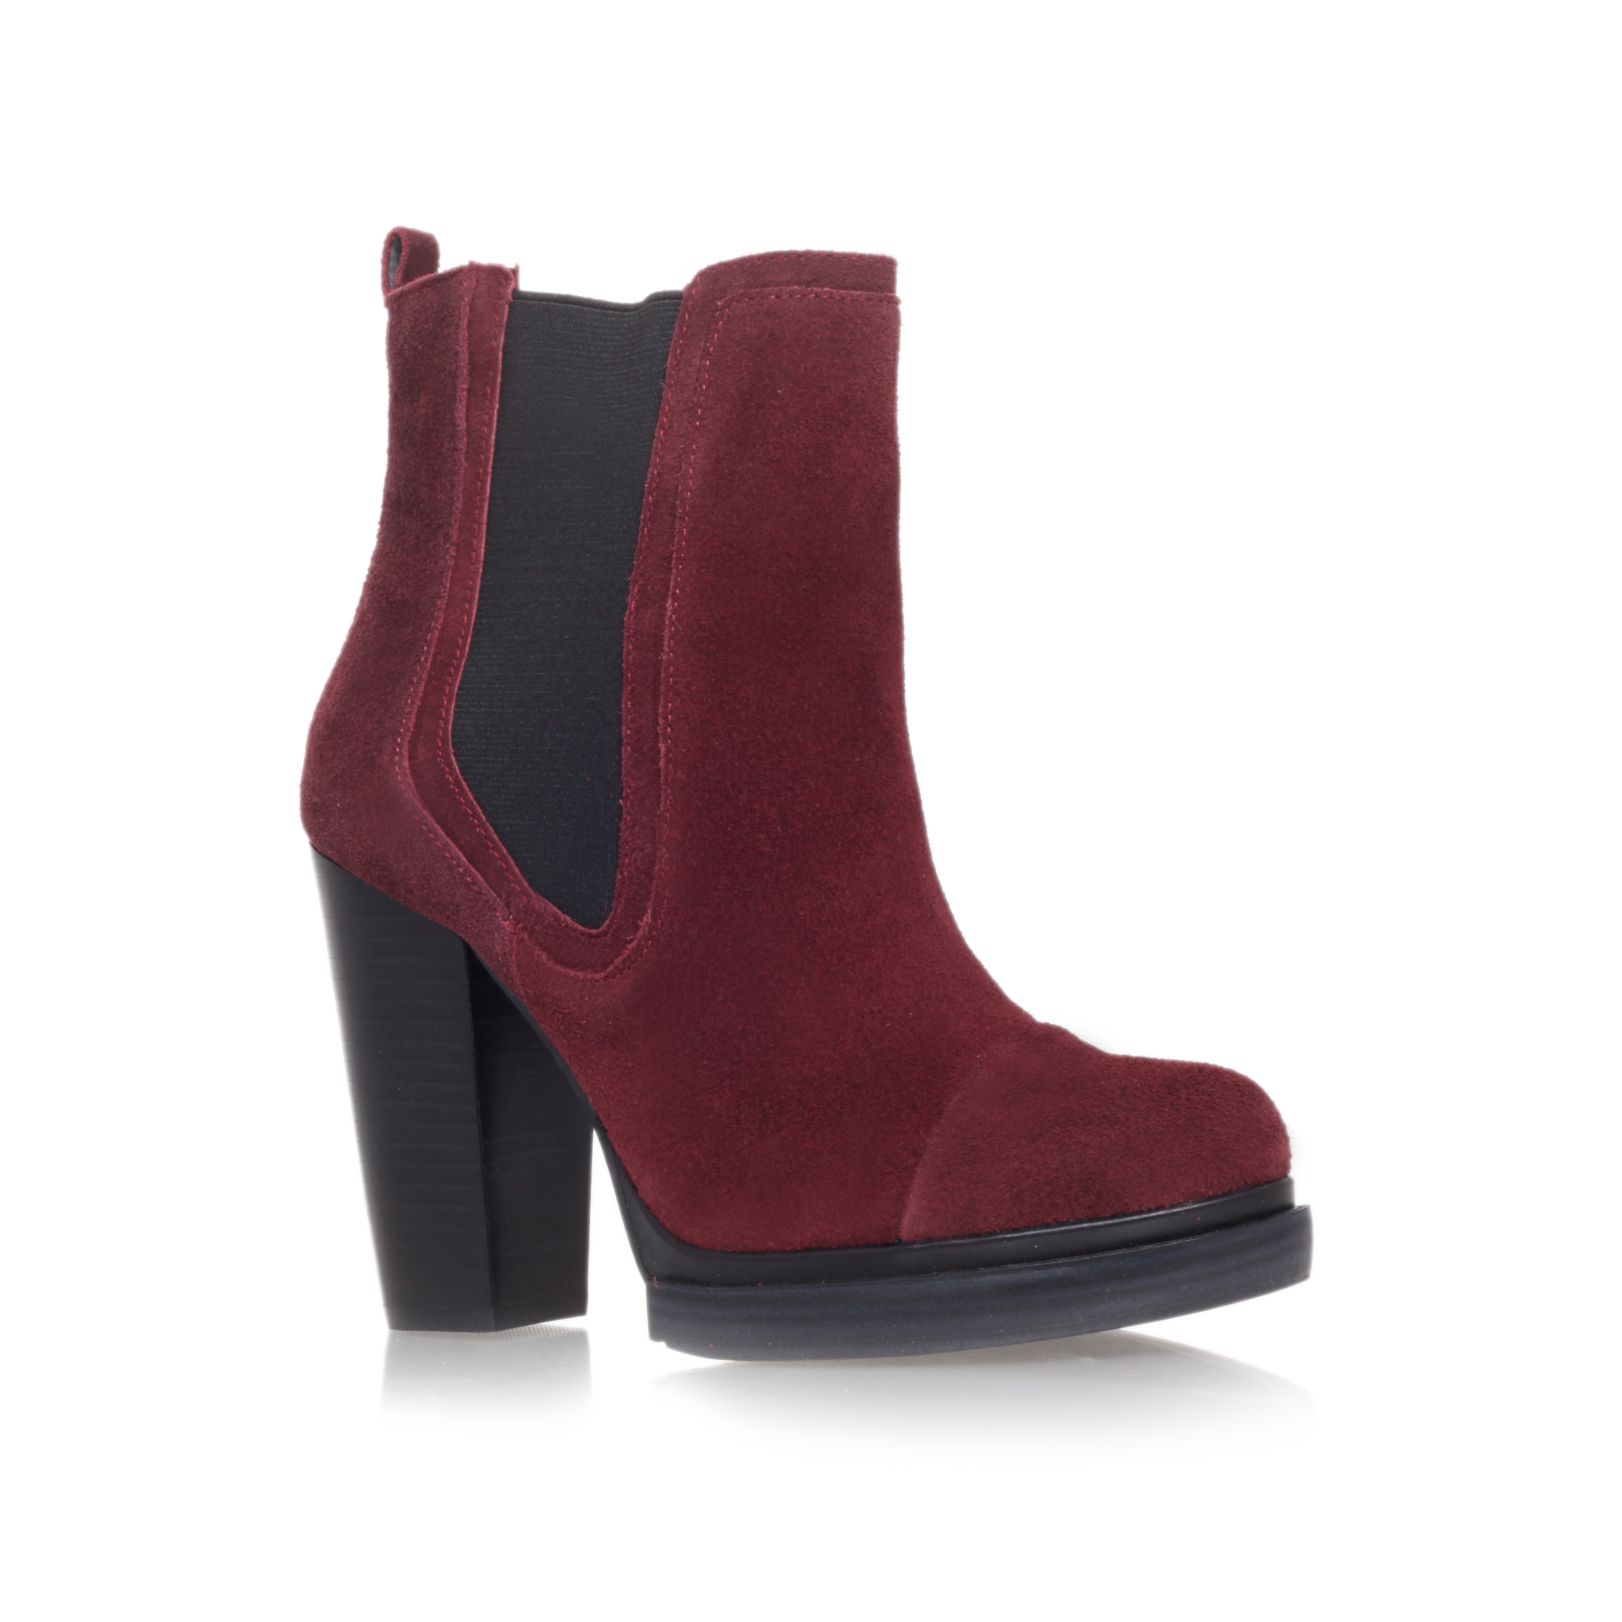 Kg by kurt geiger Shannon High Heel Chelsea Boots in Red | Lyst